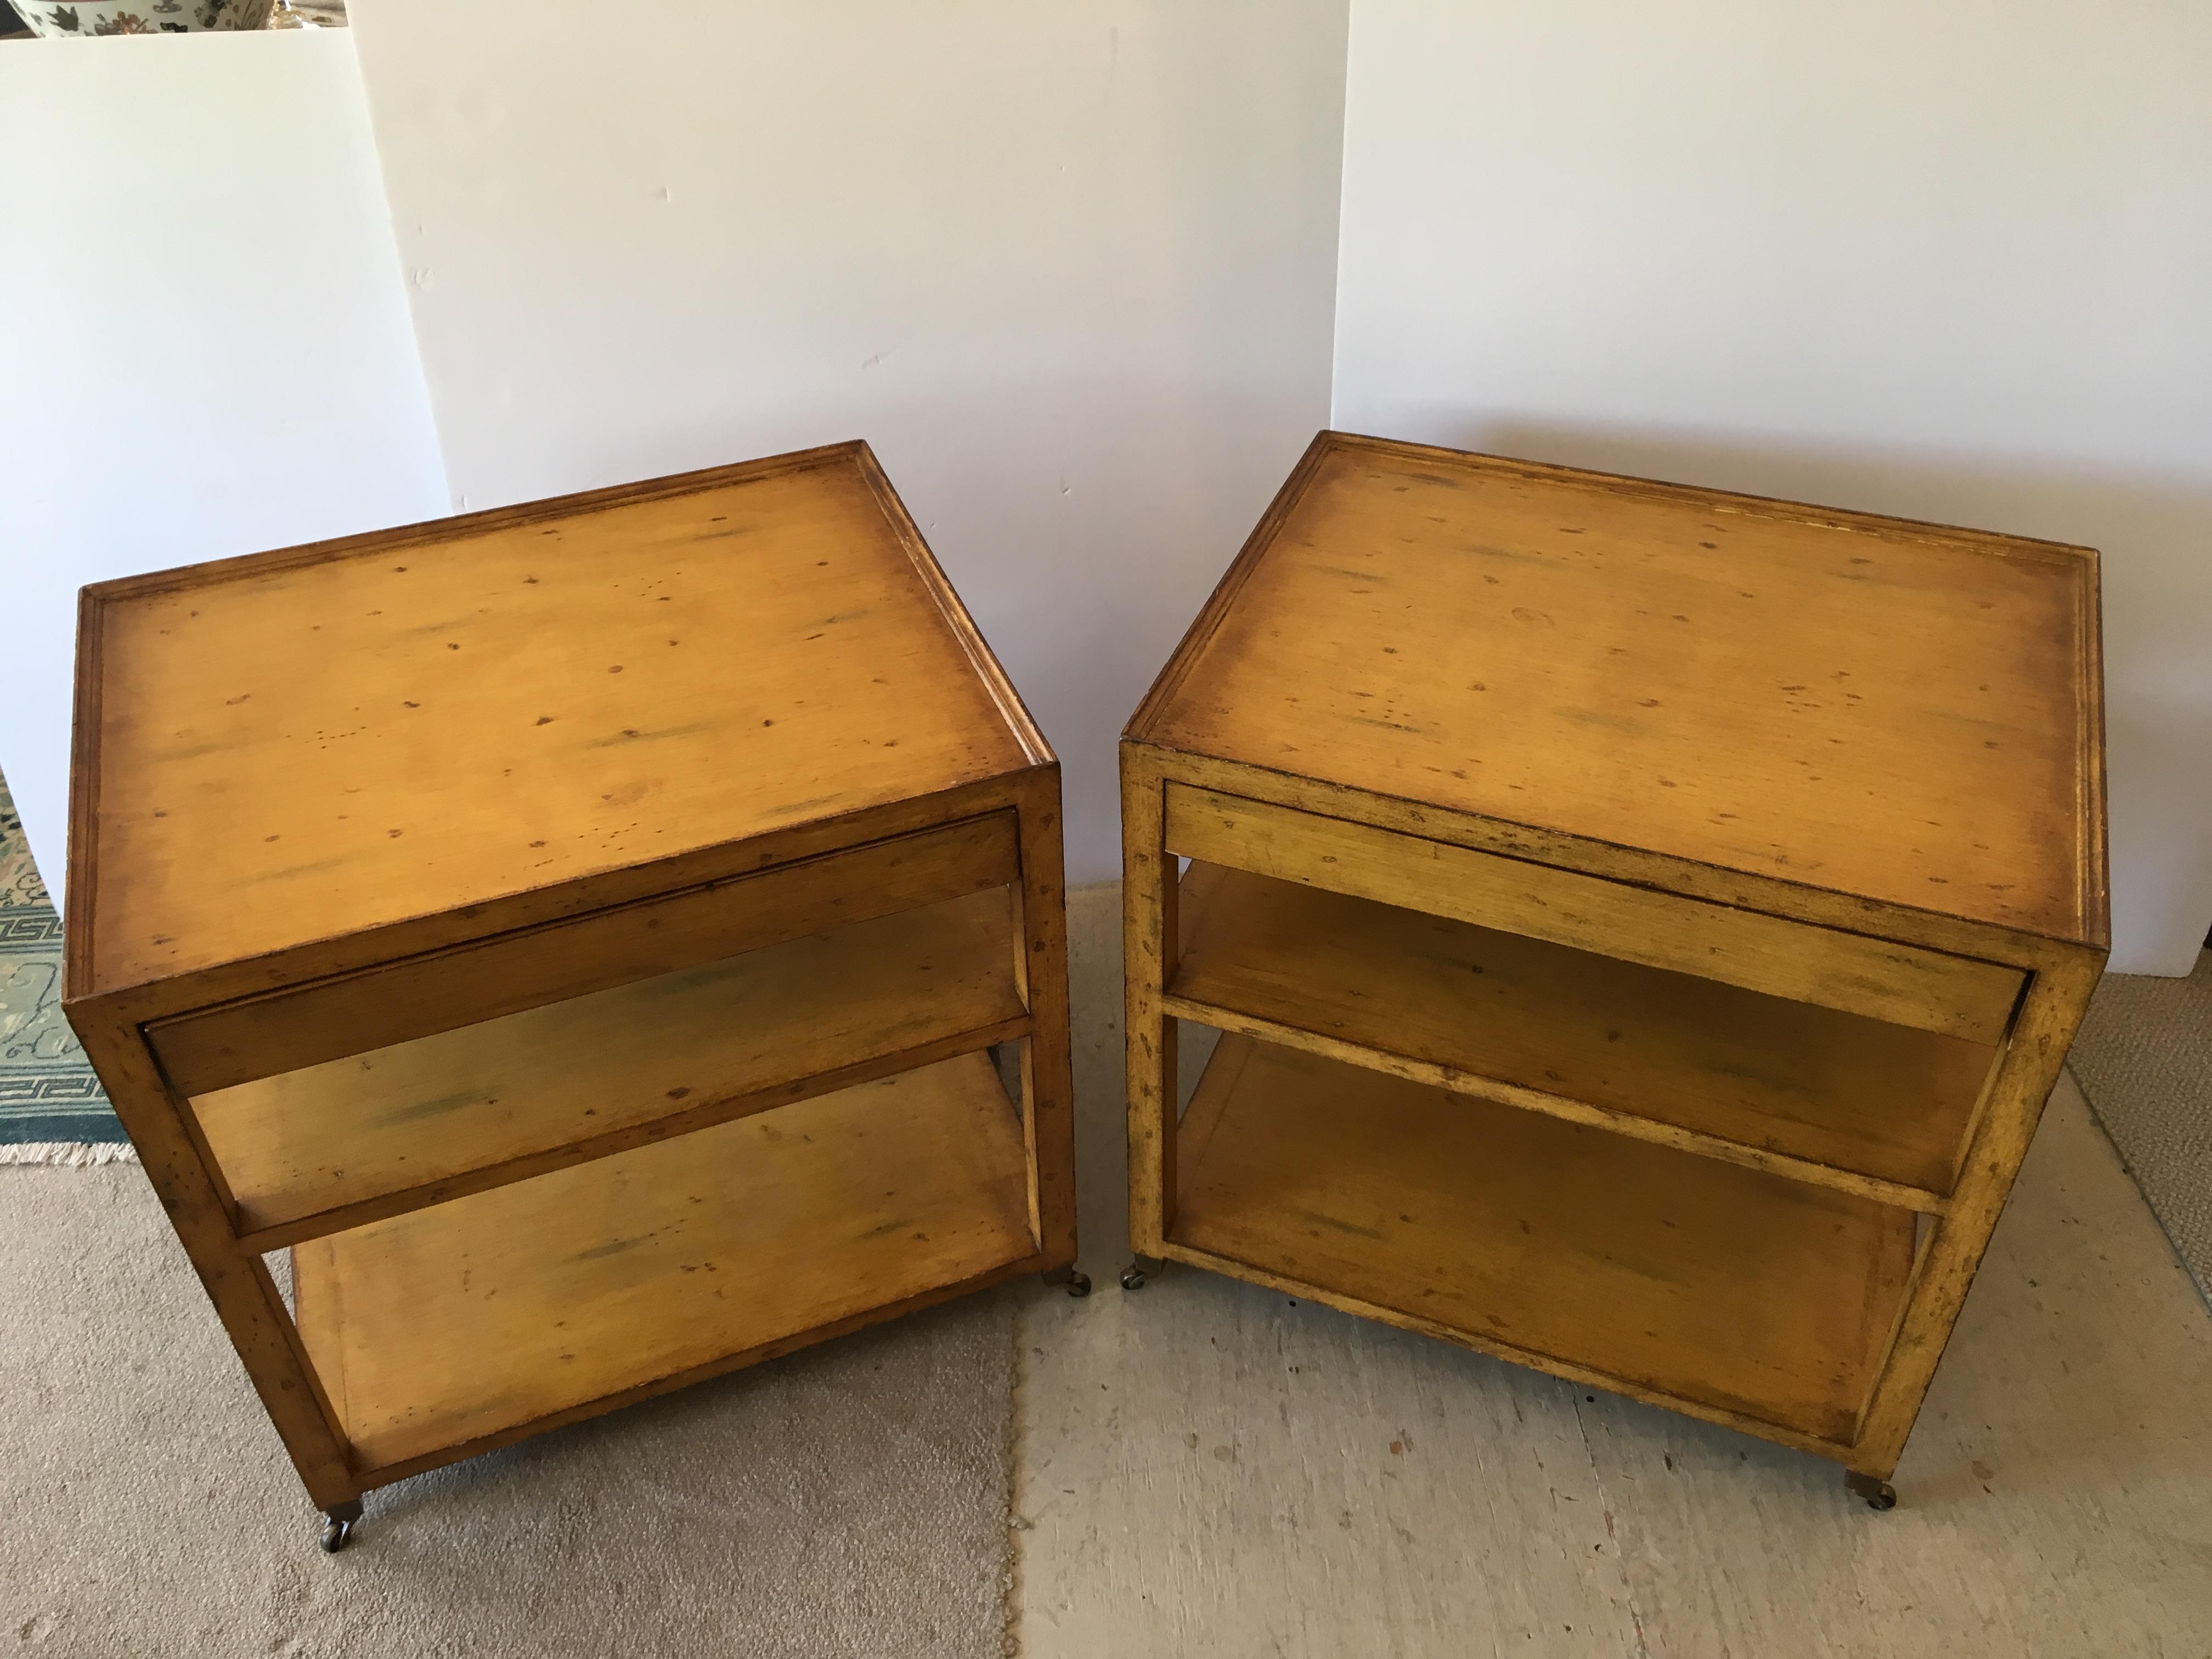 A great looking pair of mustard painted mahogany nightstands, solid in construction, having 3 tiers, single drawer and brass casters.